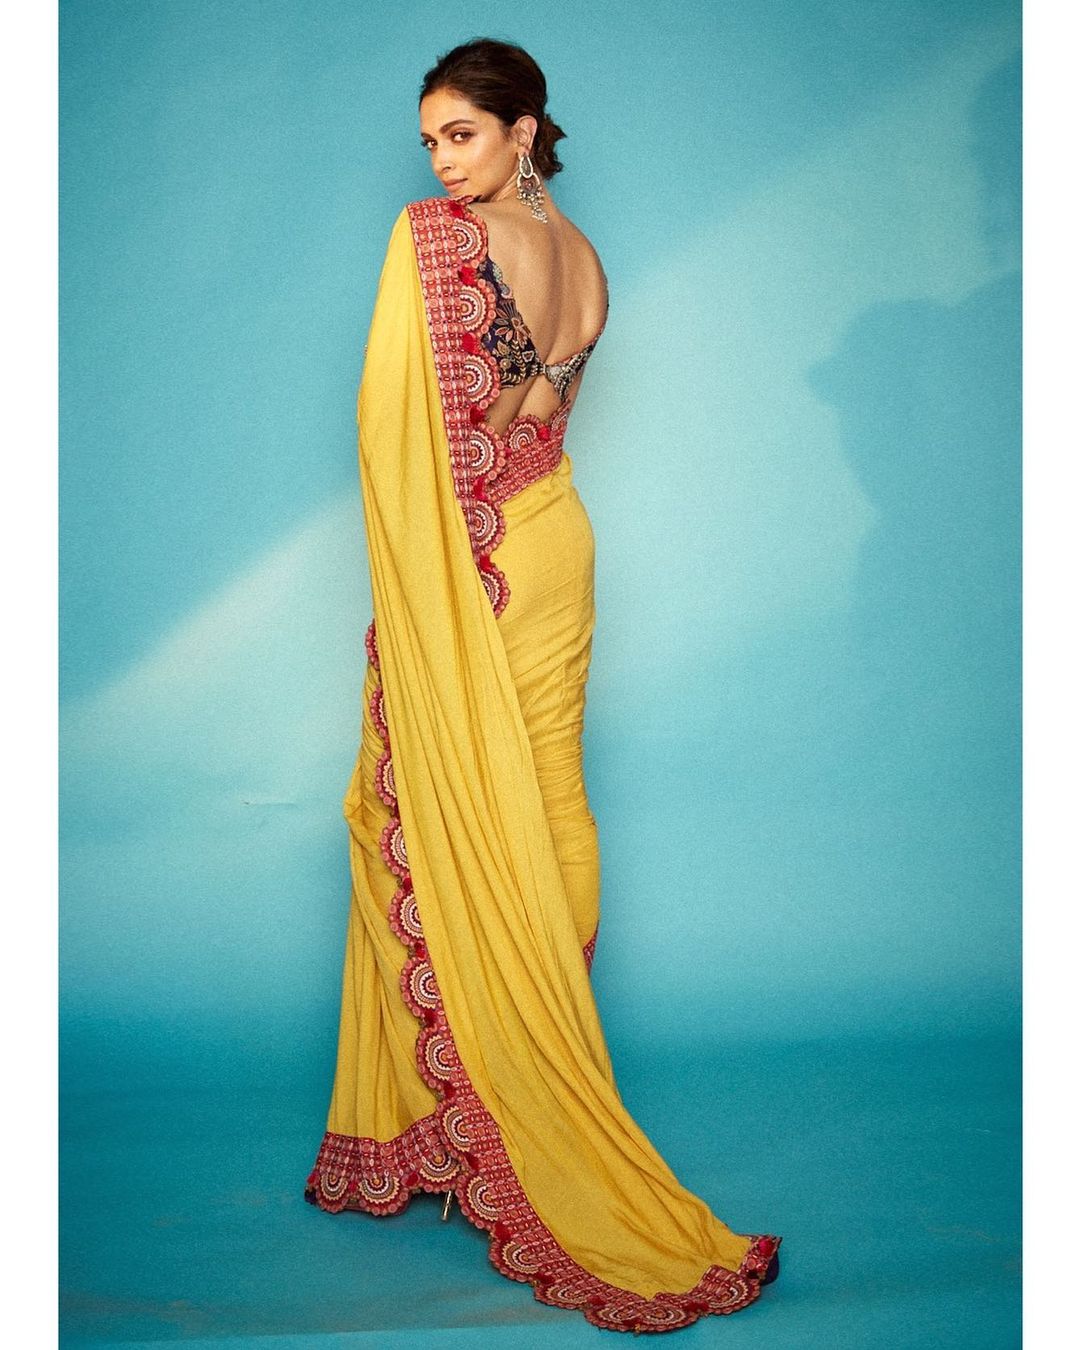 Deepika Padukone looks graceful in the yellow saree with the pink border.